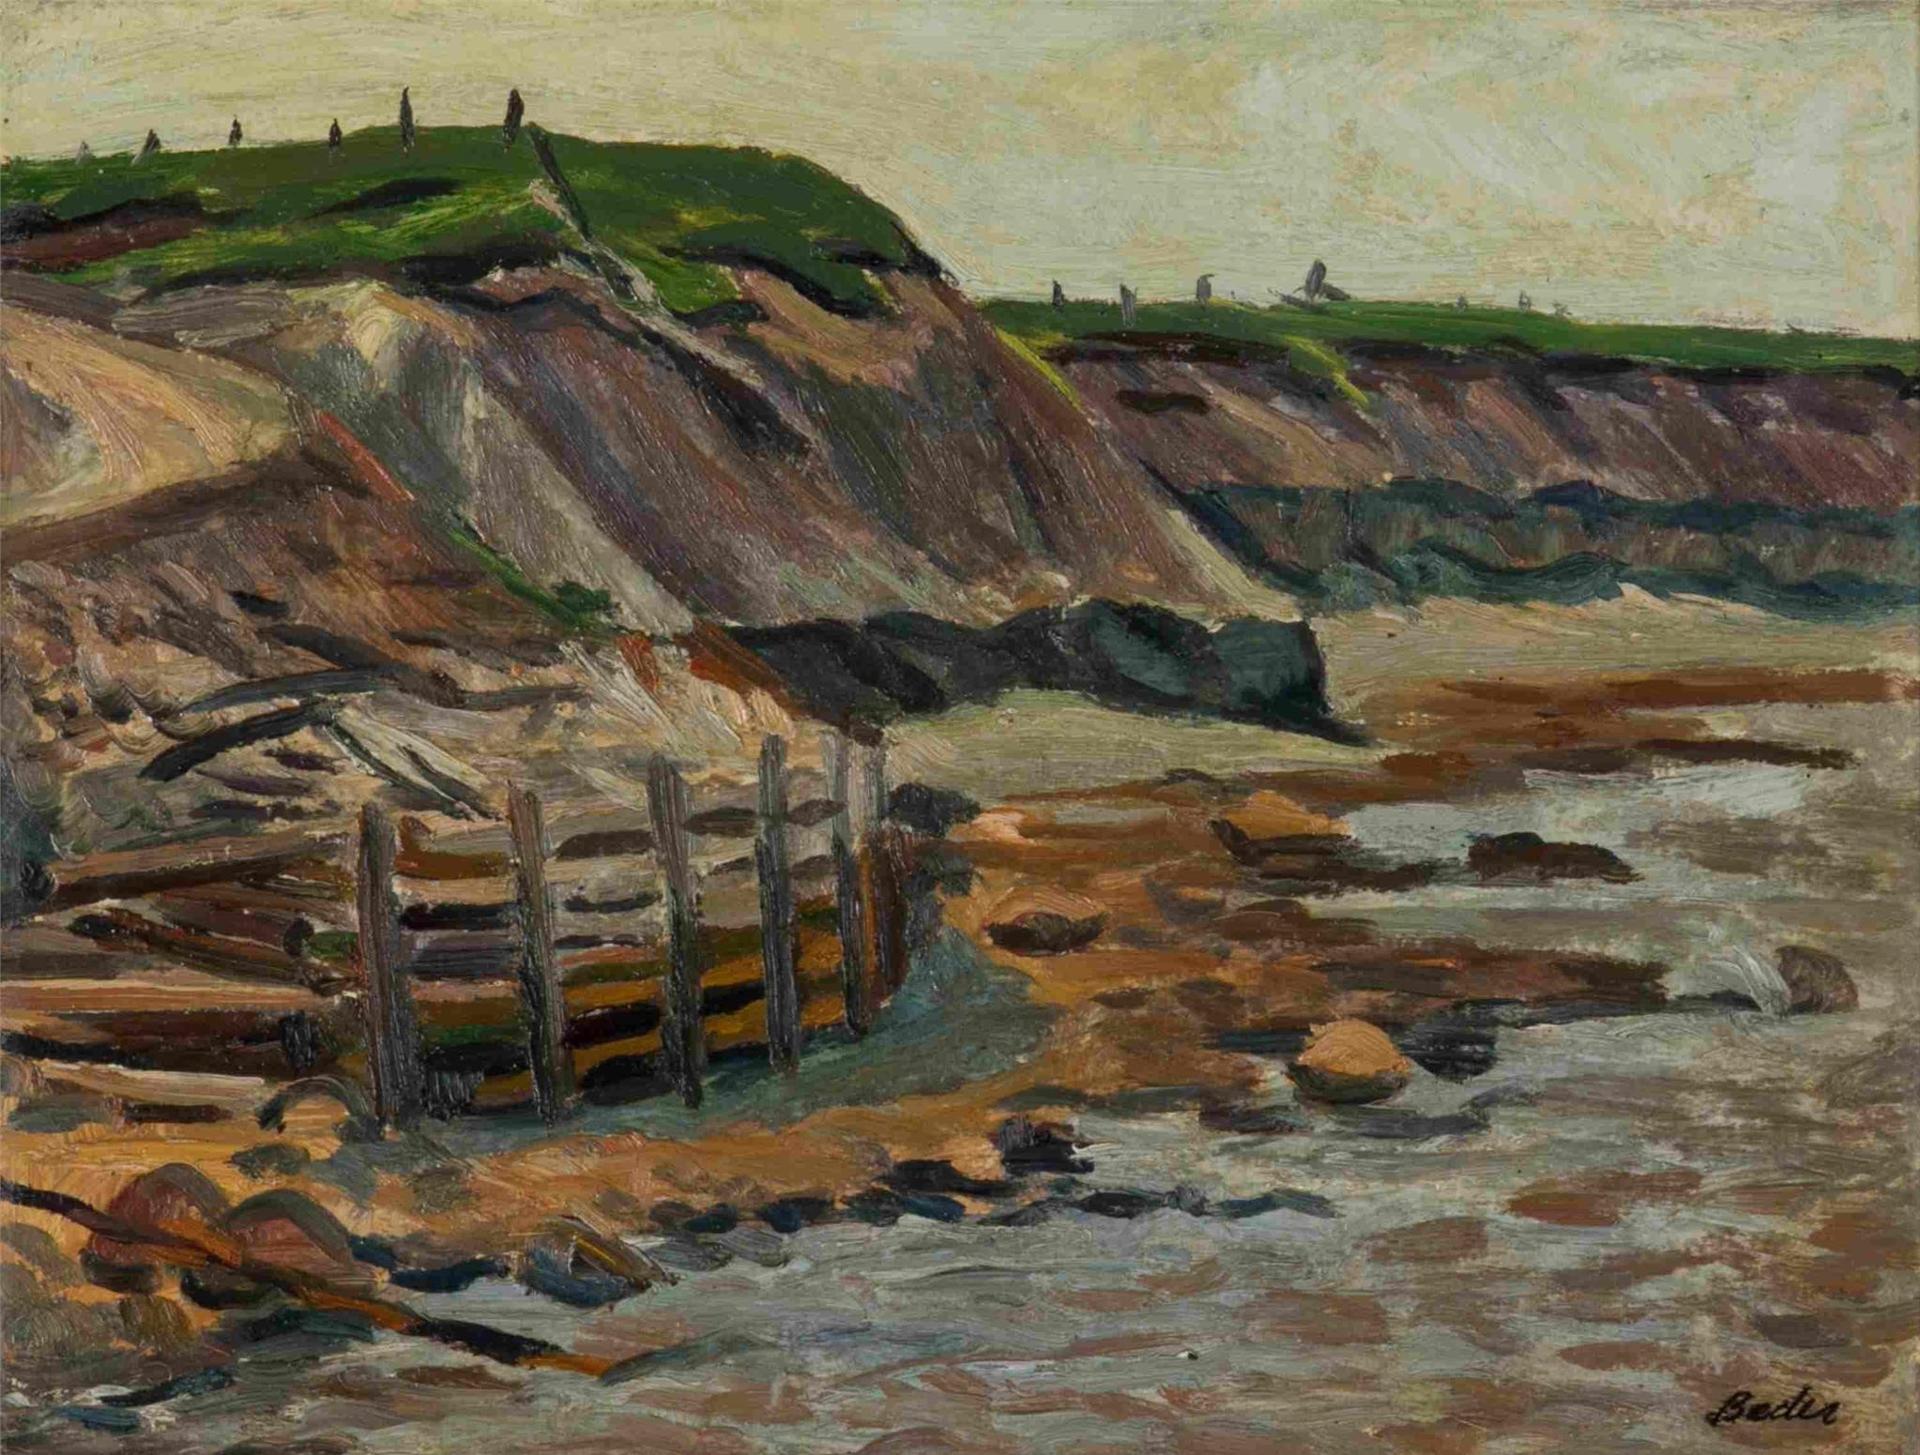 Jack Beder (1910-1987) - Reed's Cove, Stonehaven, NB (1951)